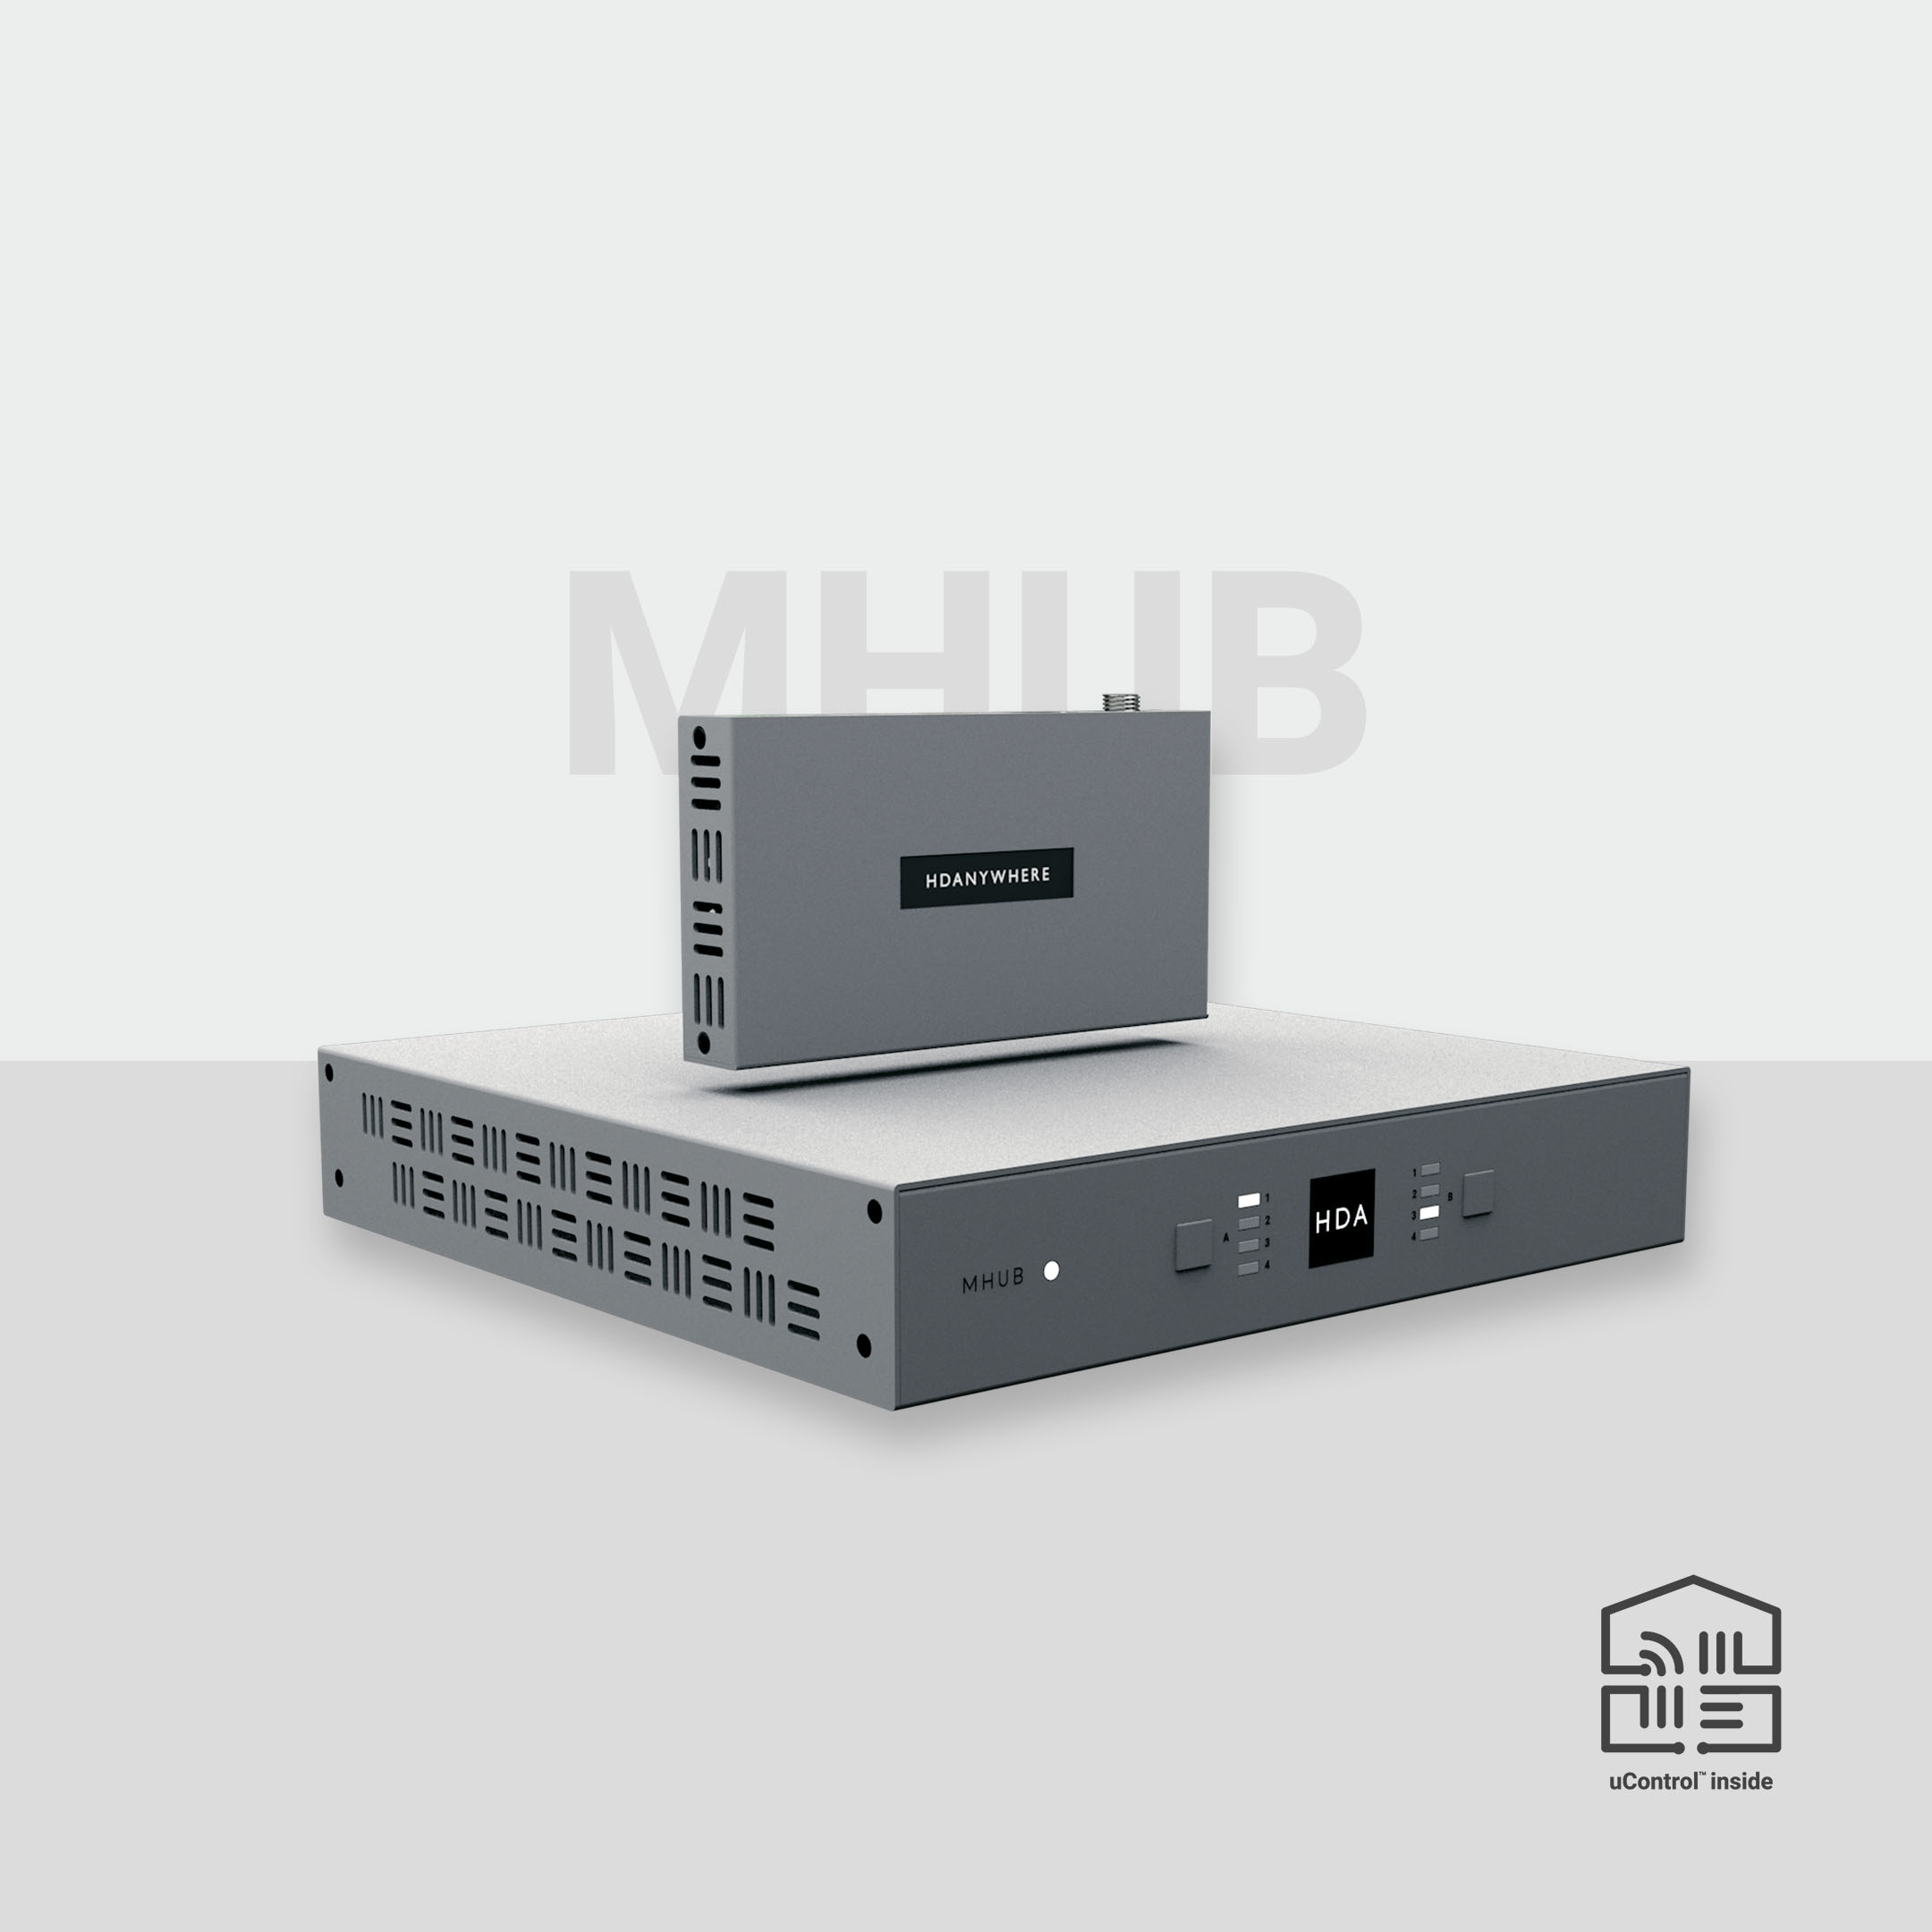 MHUB U 4x1+1) 40 with its packaging